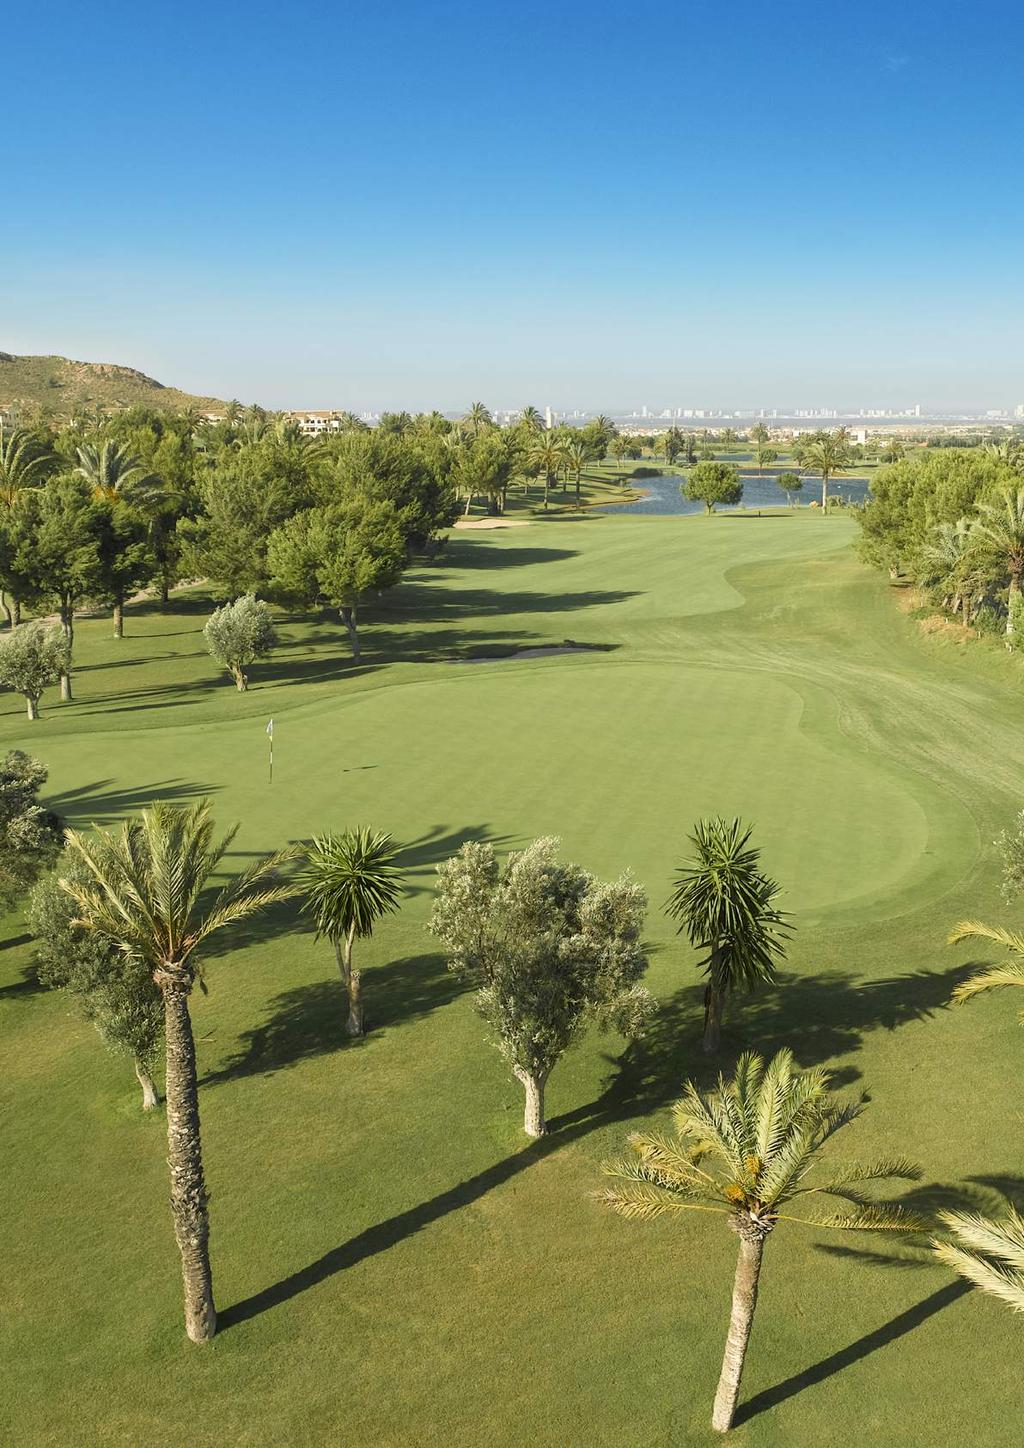 14 SPAIN Whether it is a city break to Barcelona or Madrid or an incredible coastal adventure to Andalucia, Spain is a golfing destination that really does have it all.